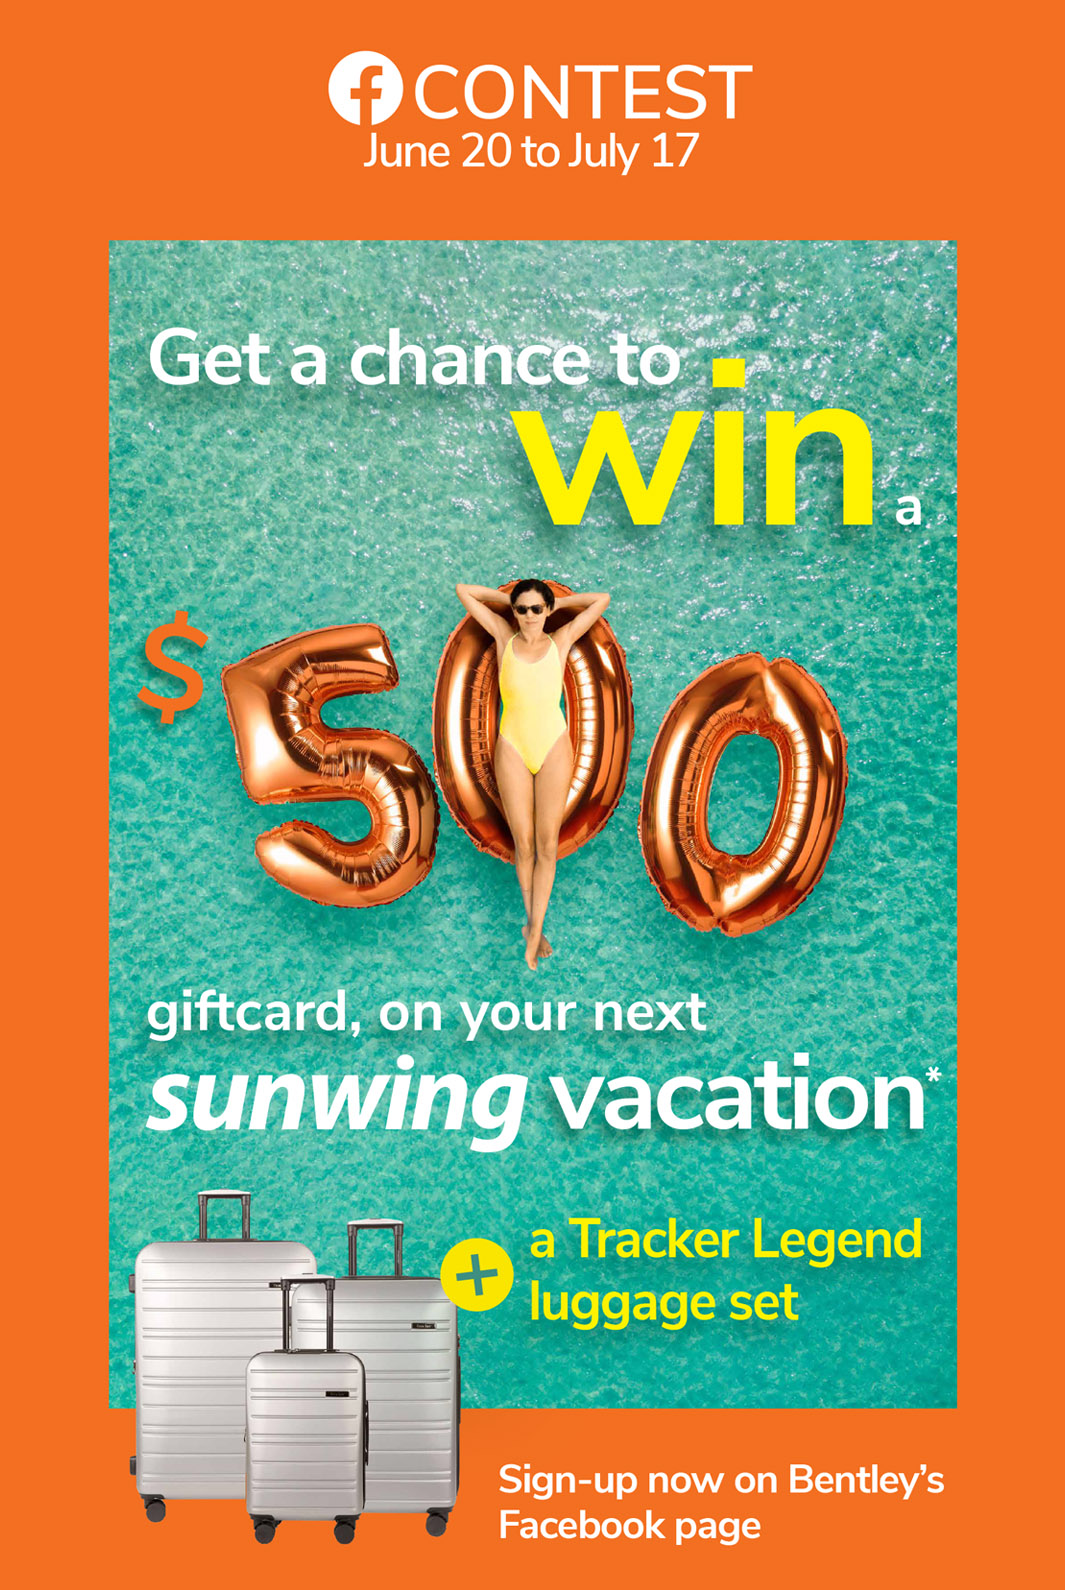 “Transporting Happiness With Sunwing” Contest